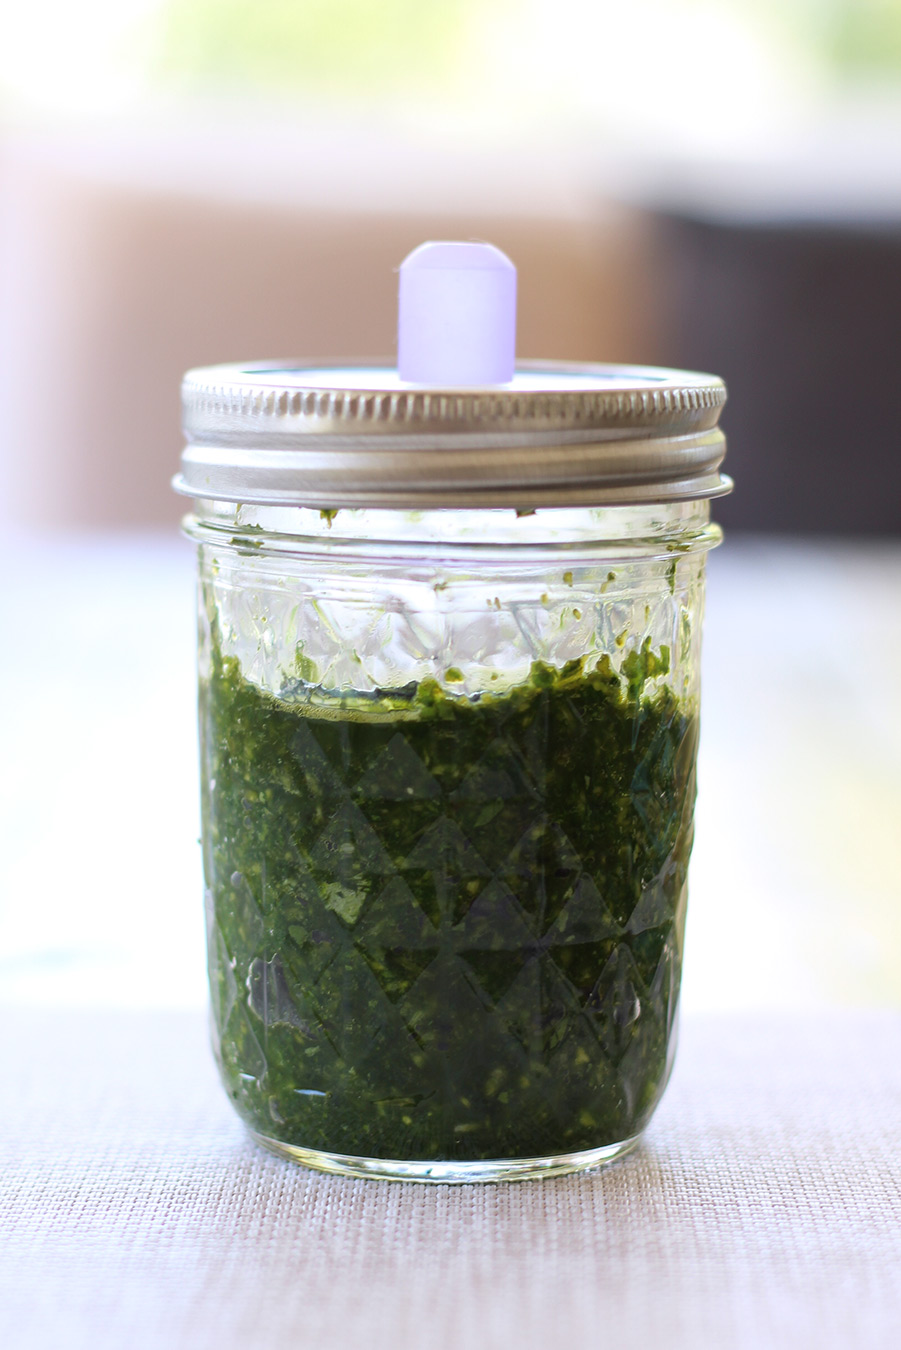 Bursting with sweet, herby, garlic flavor, this Fermented Basil and garlic paste recipe is the perfect base for dressings and sauces. 